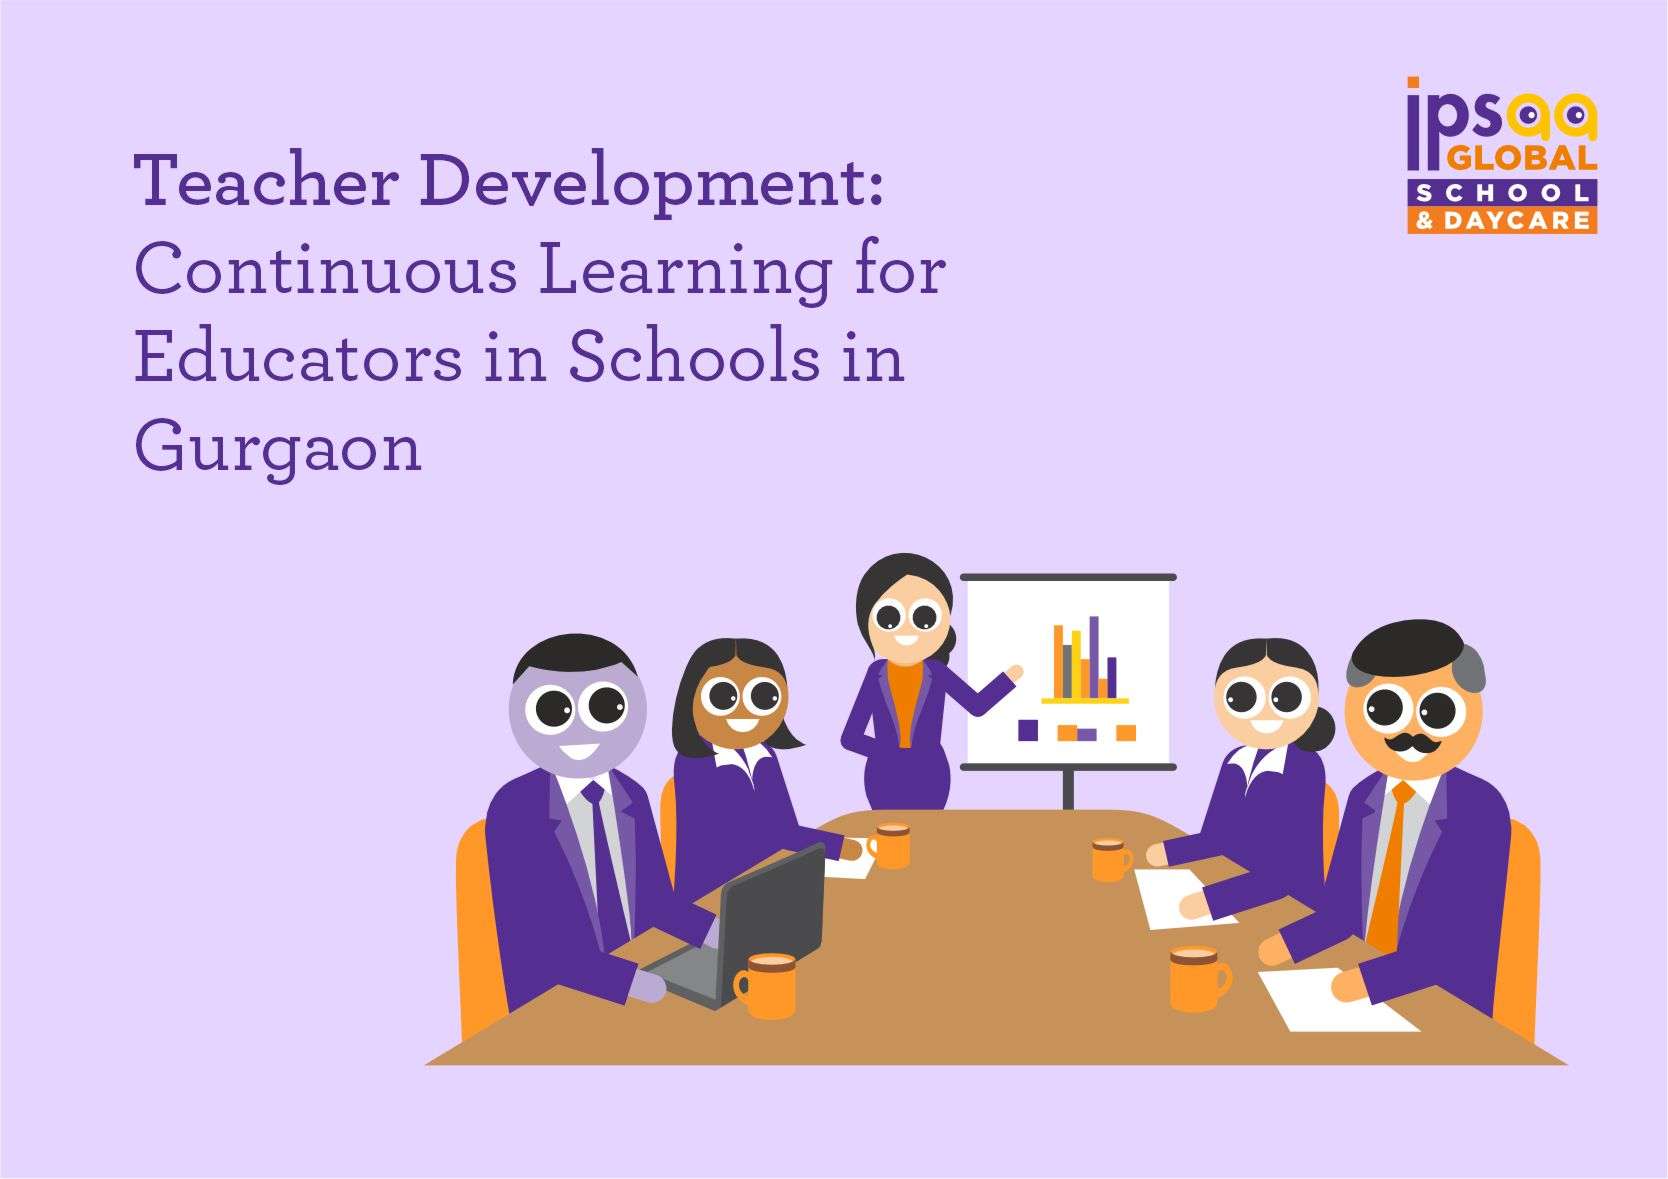 Nurturing Excellence: Teacher Development and Continuous Learning in Gurgaon Schools